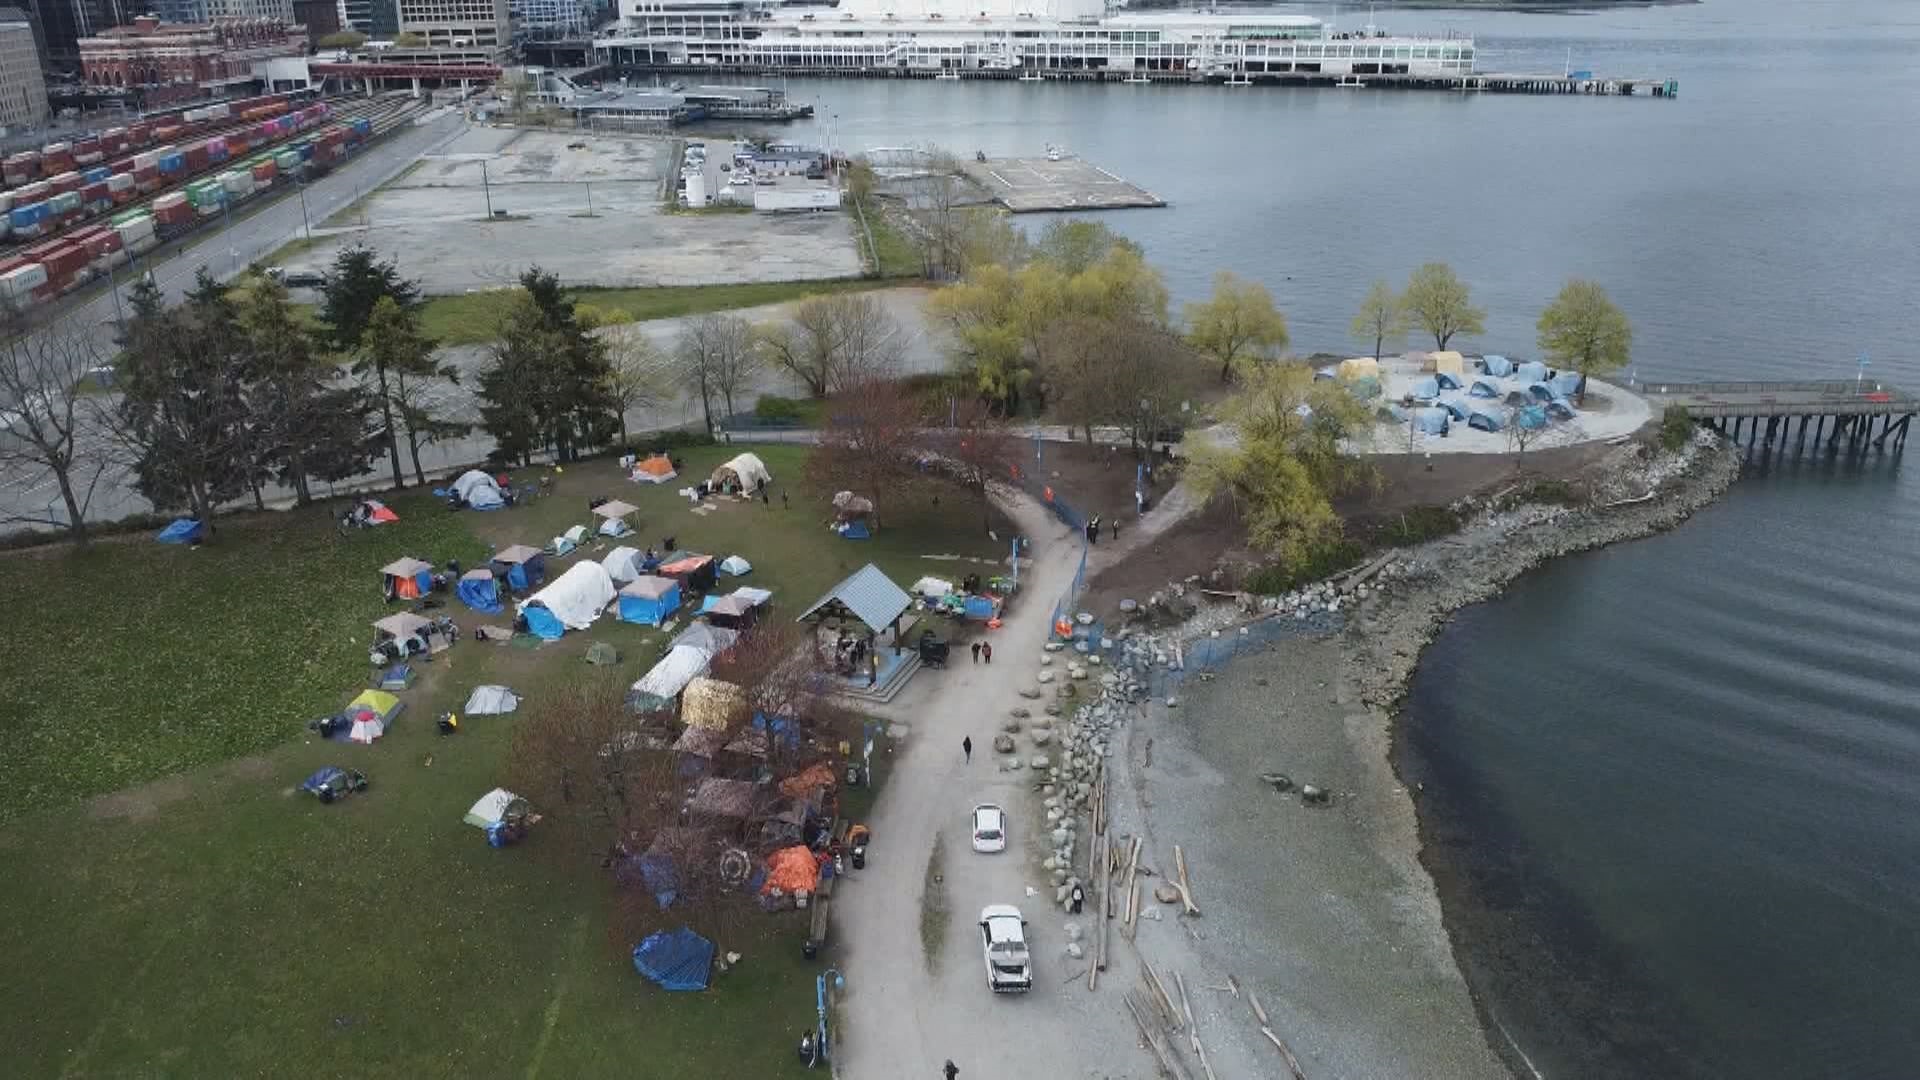 Barbecue held to mark 3rd anniversary of Vancouver’s CRAB Park encampment